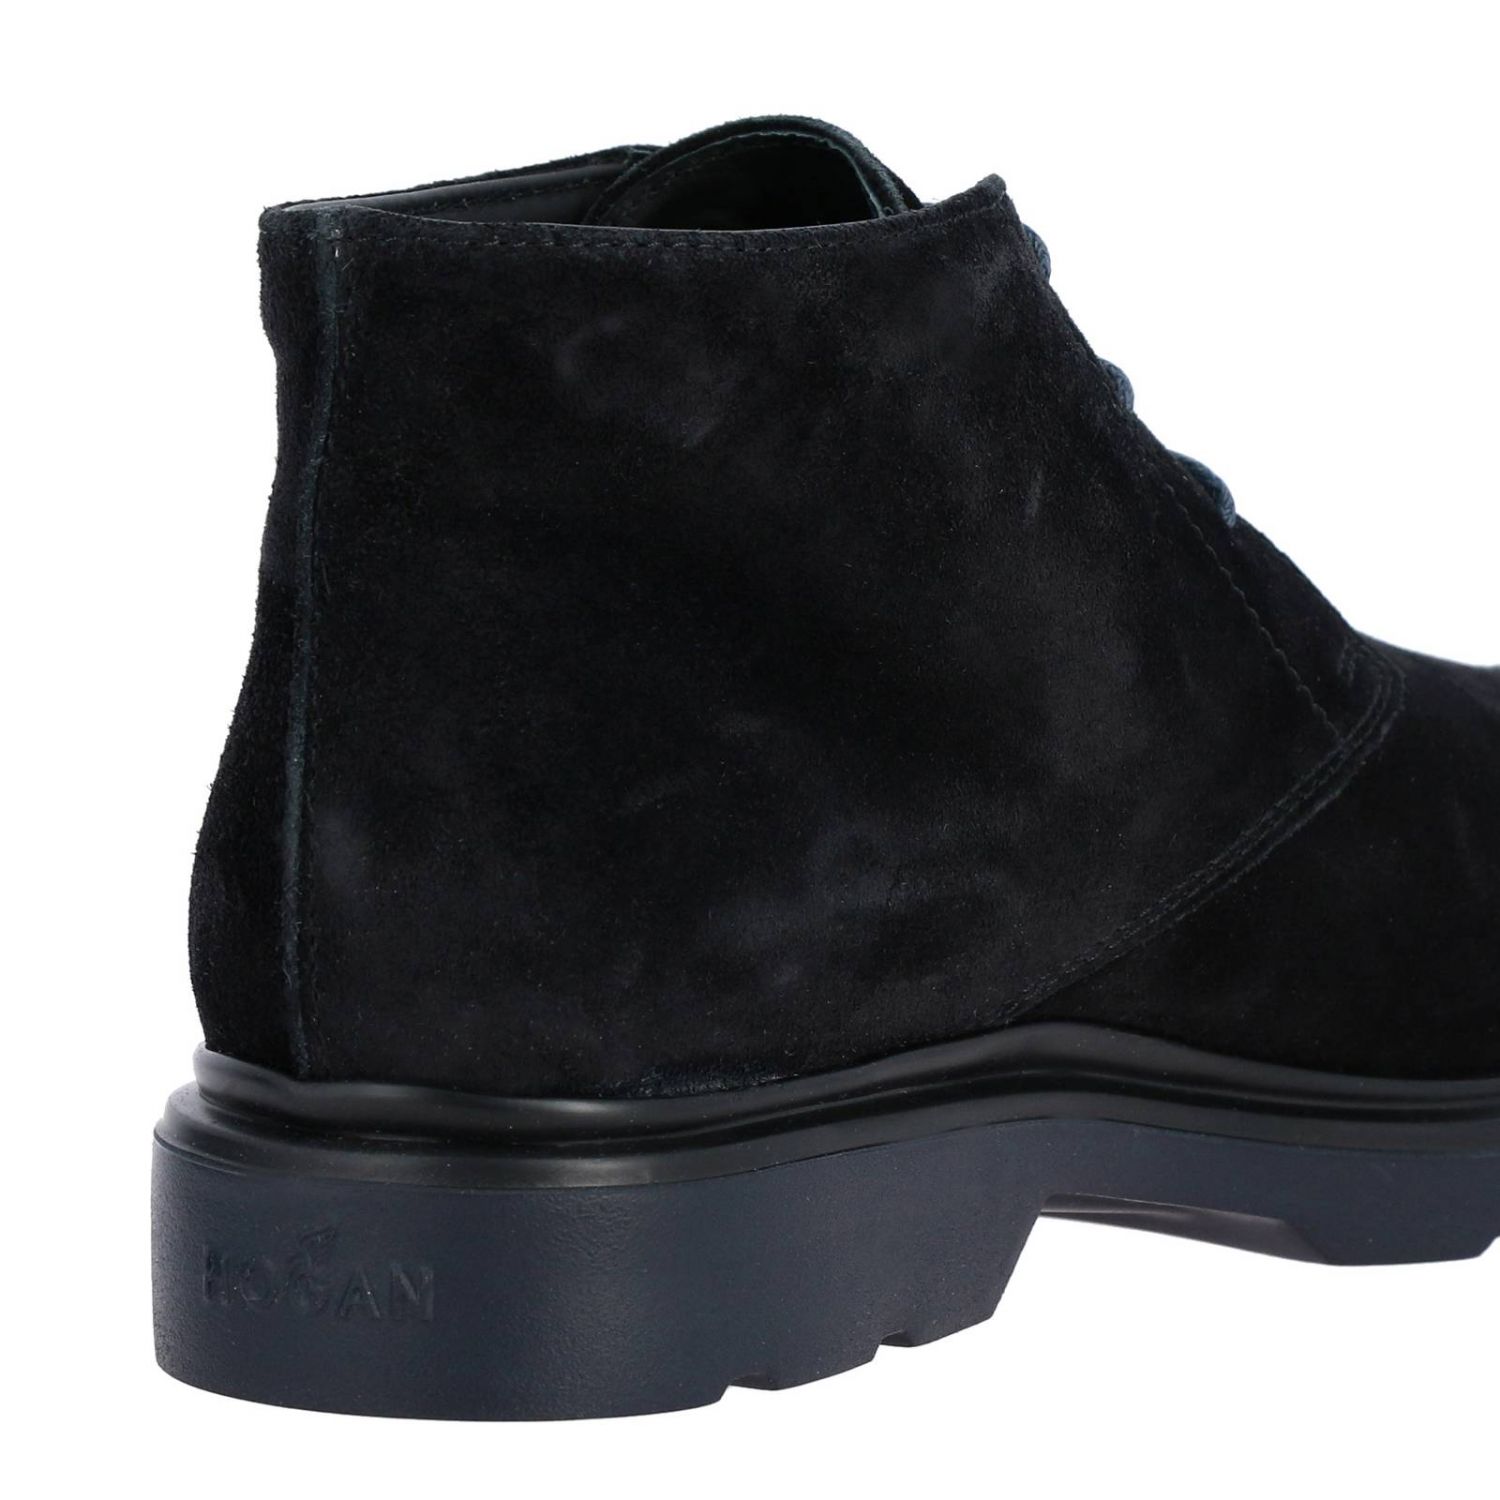 Chukka boots Hogan: Route 393 ankle boots (H304 + memory sole) Hogan in suede black 4